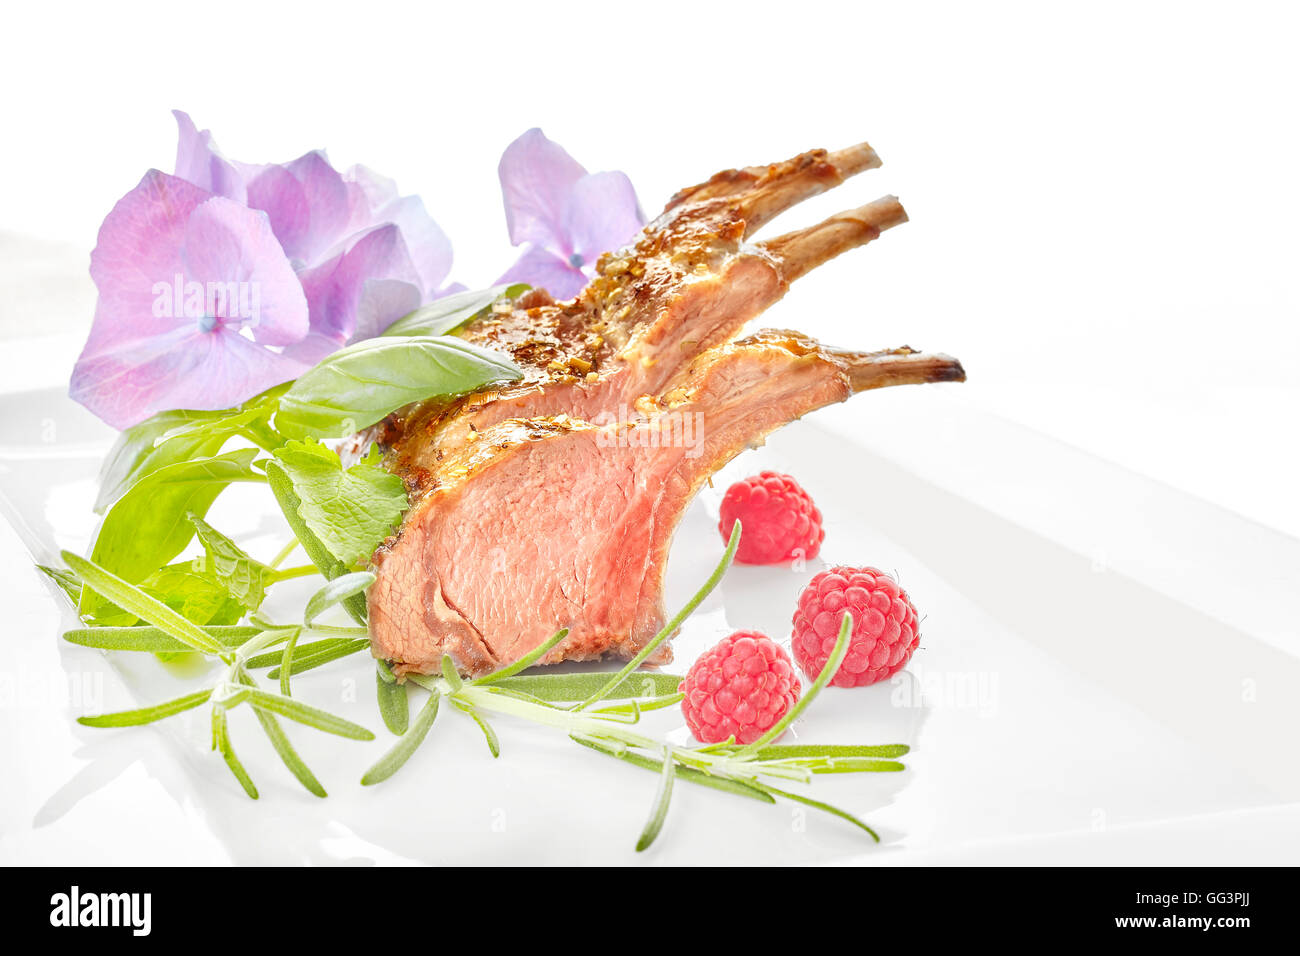 Roasted lamb rib chops with raspberries on a plate, dinner setting. Stock Photo